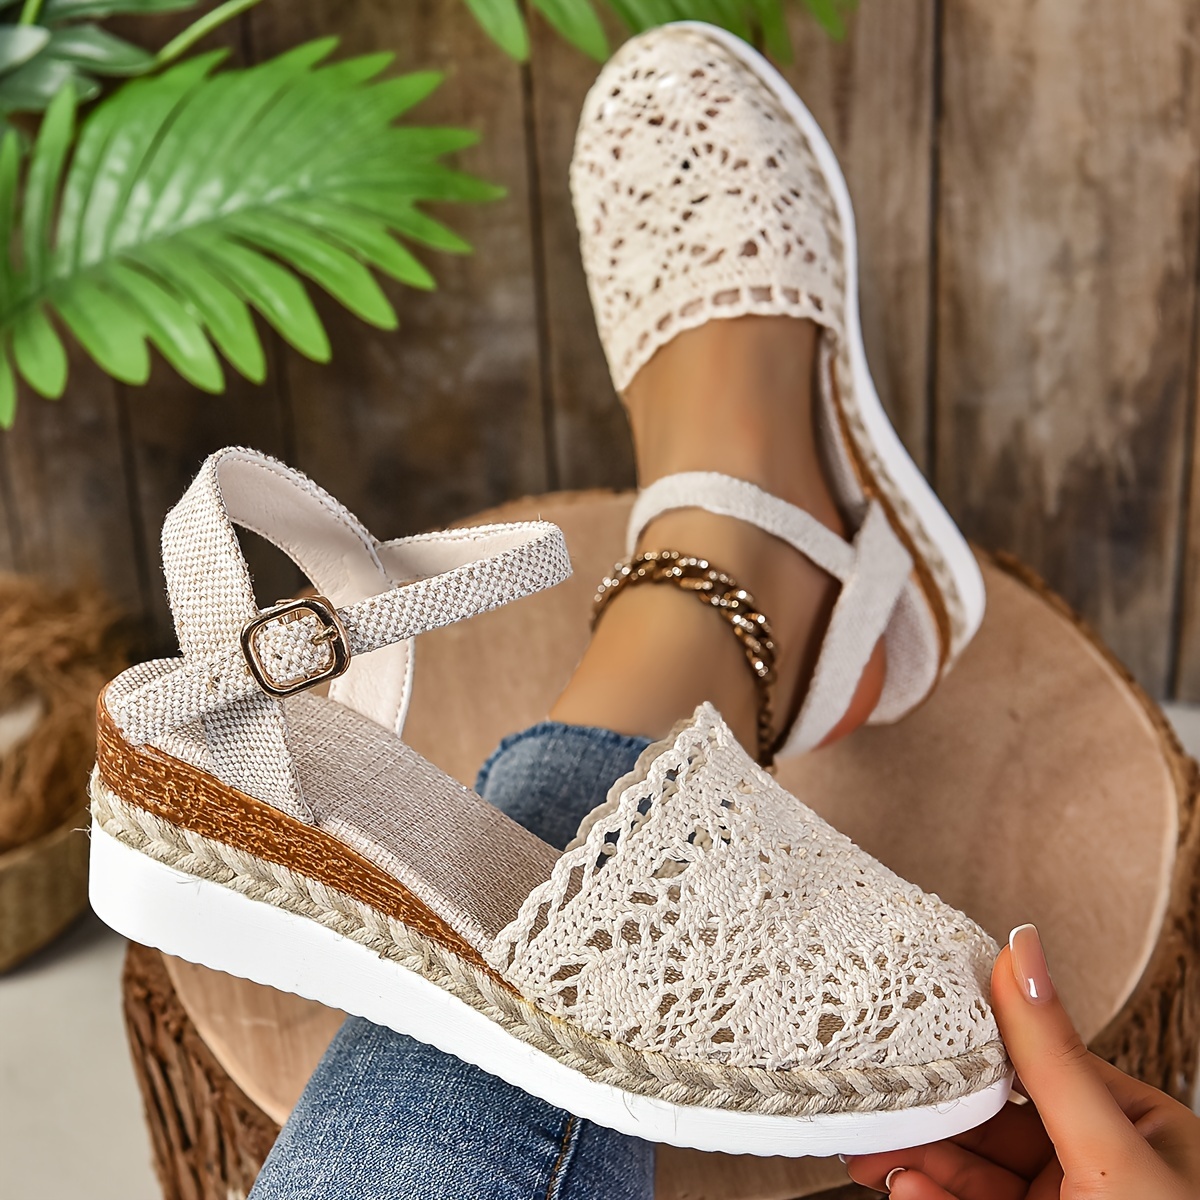 

Women's Wedge Platform Sandals, Summer Espadrille Closed Toe Breathable Hollow Sandals, Casual Fashion Ankle Strap Buckle Shoes